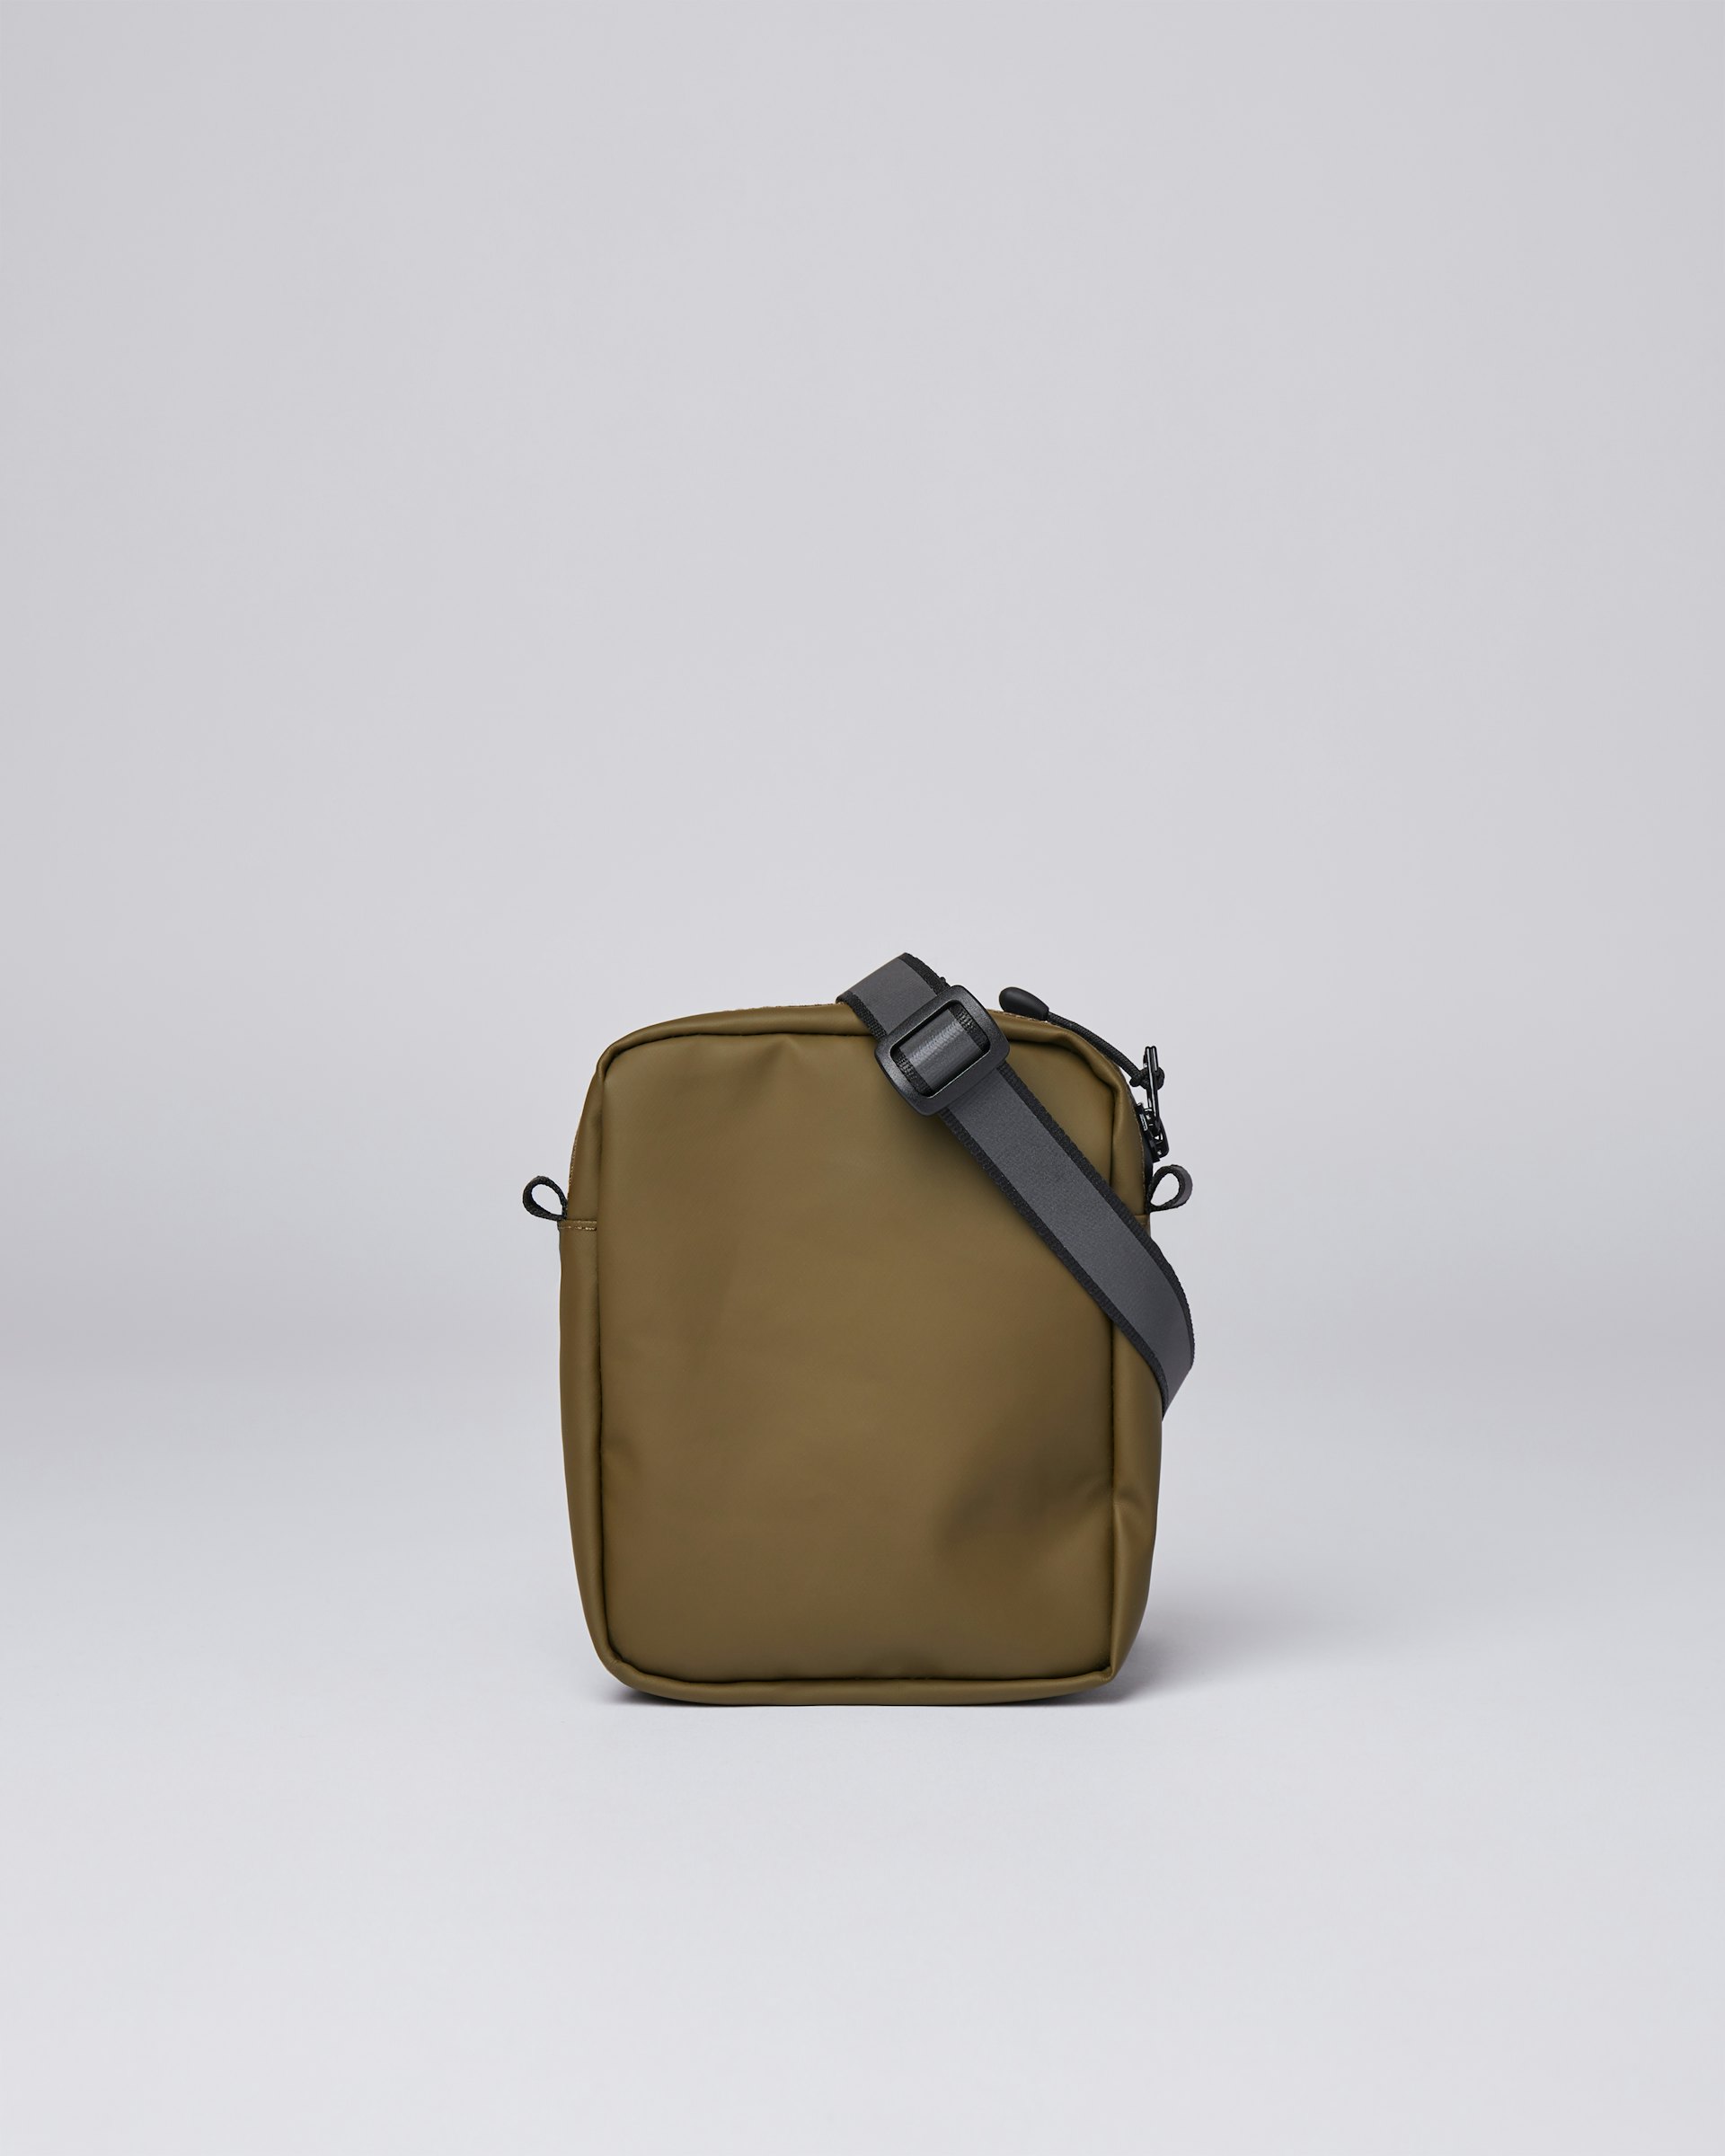 Poe belongs to the category Shoulder bags and is in color olive (2 of 5)